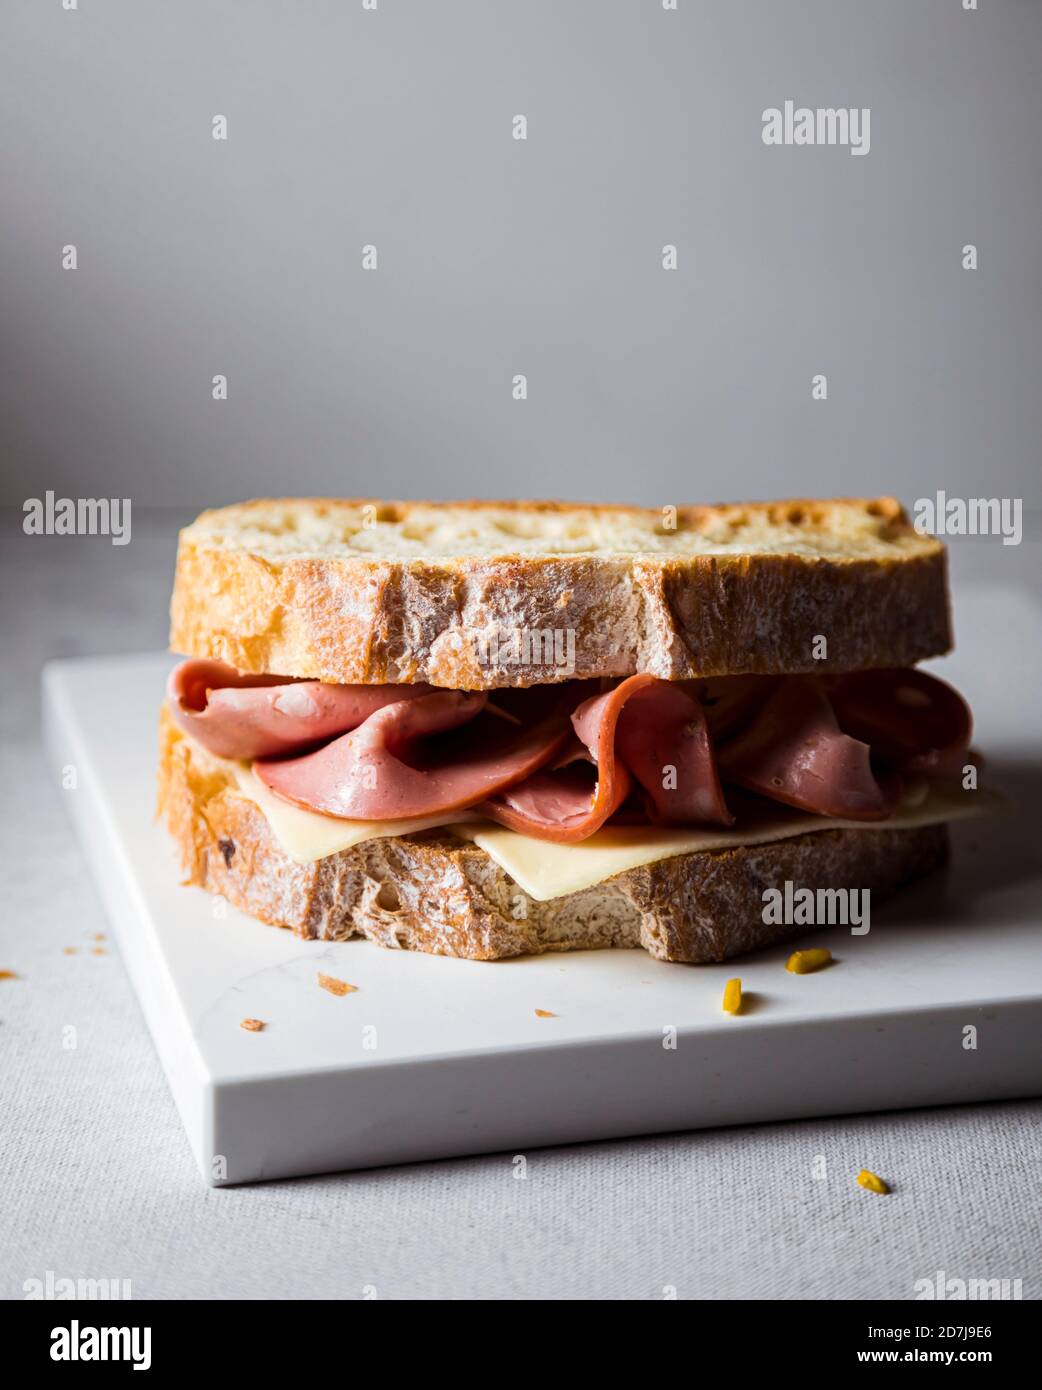 Ready-to-eat sandwich with mortadella and cheese Stock Photo